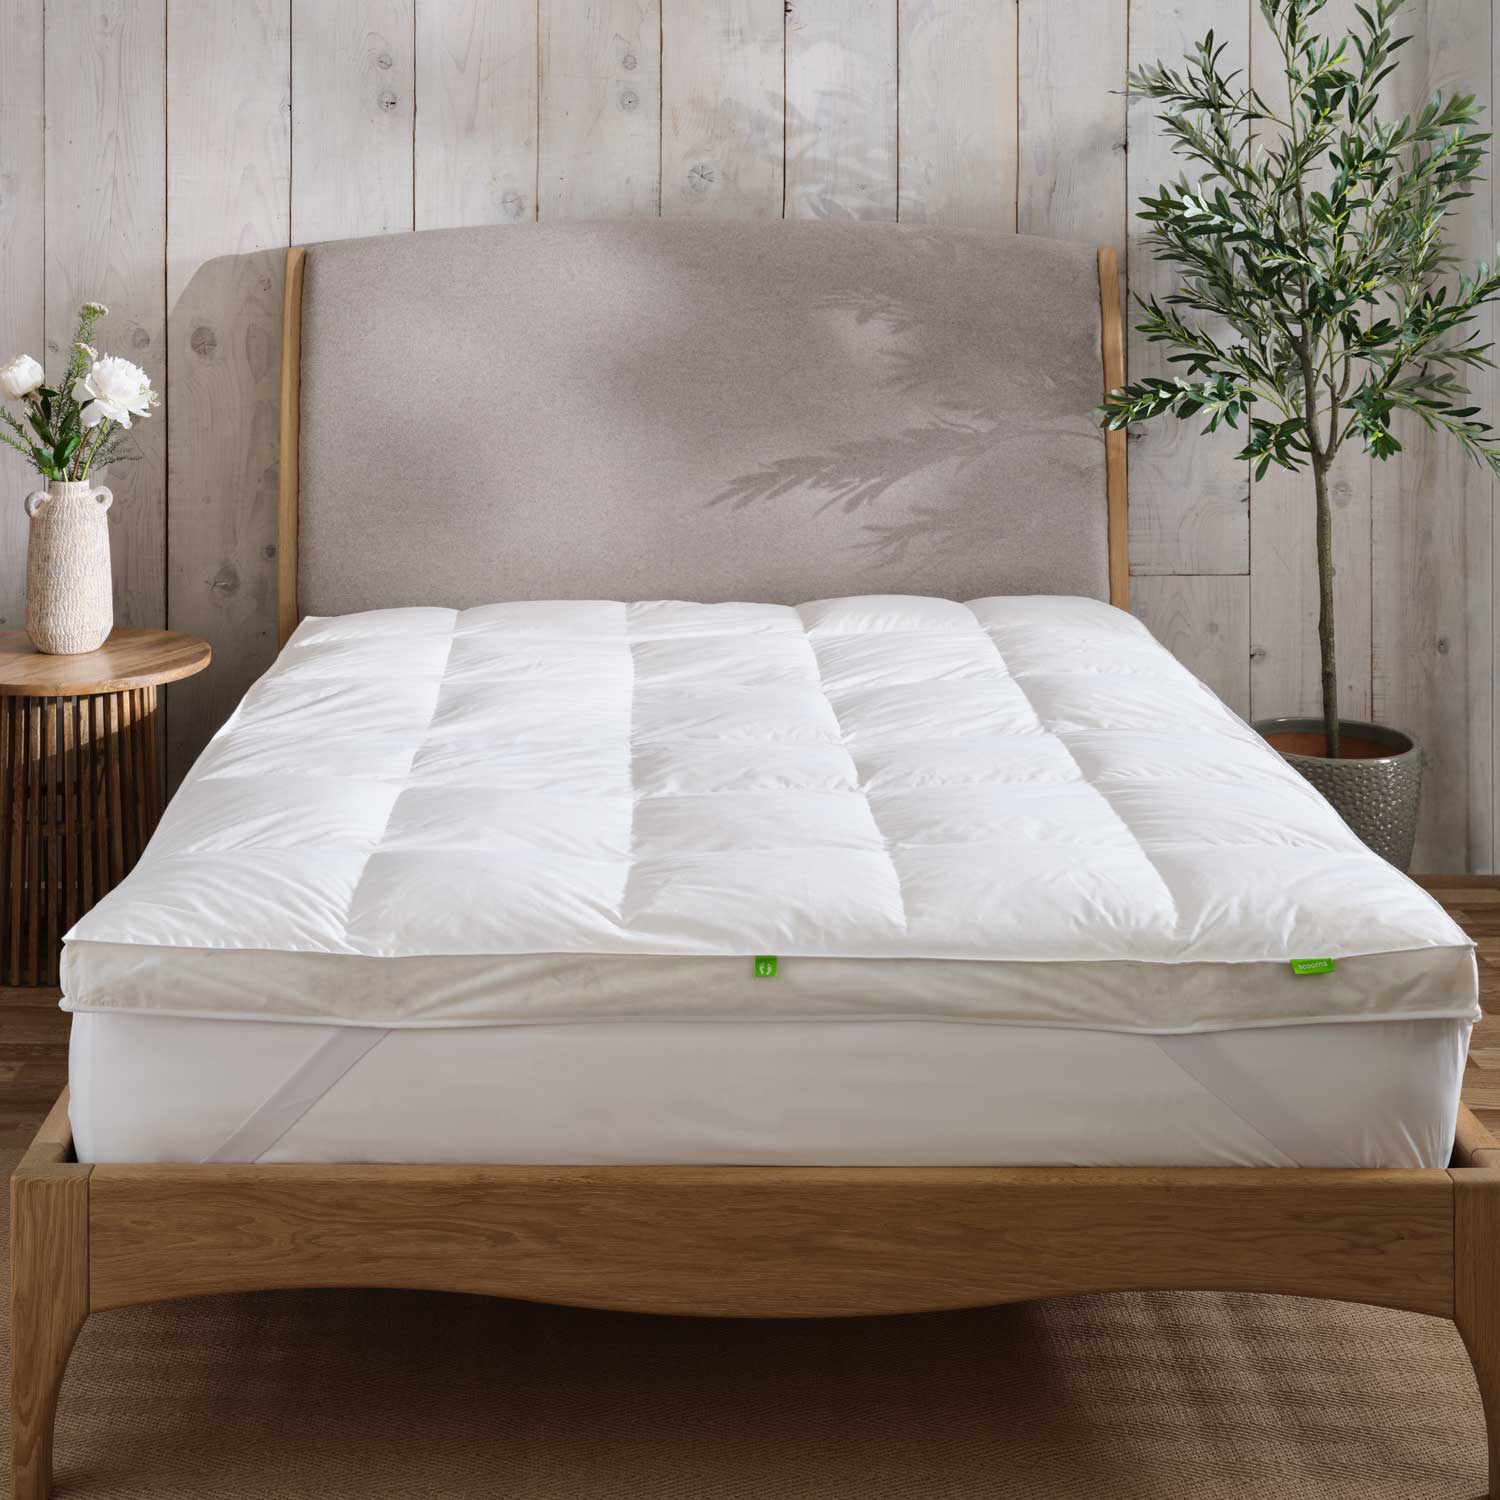 files/hungarian-feather-down-mattress-topper-scooms-product-square-front.jpg